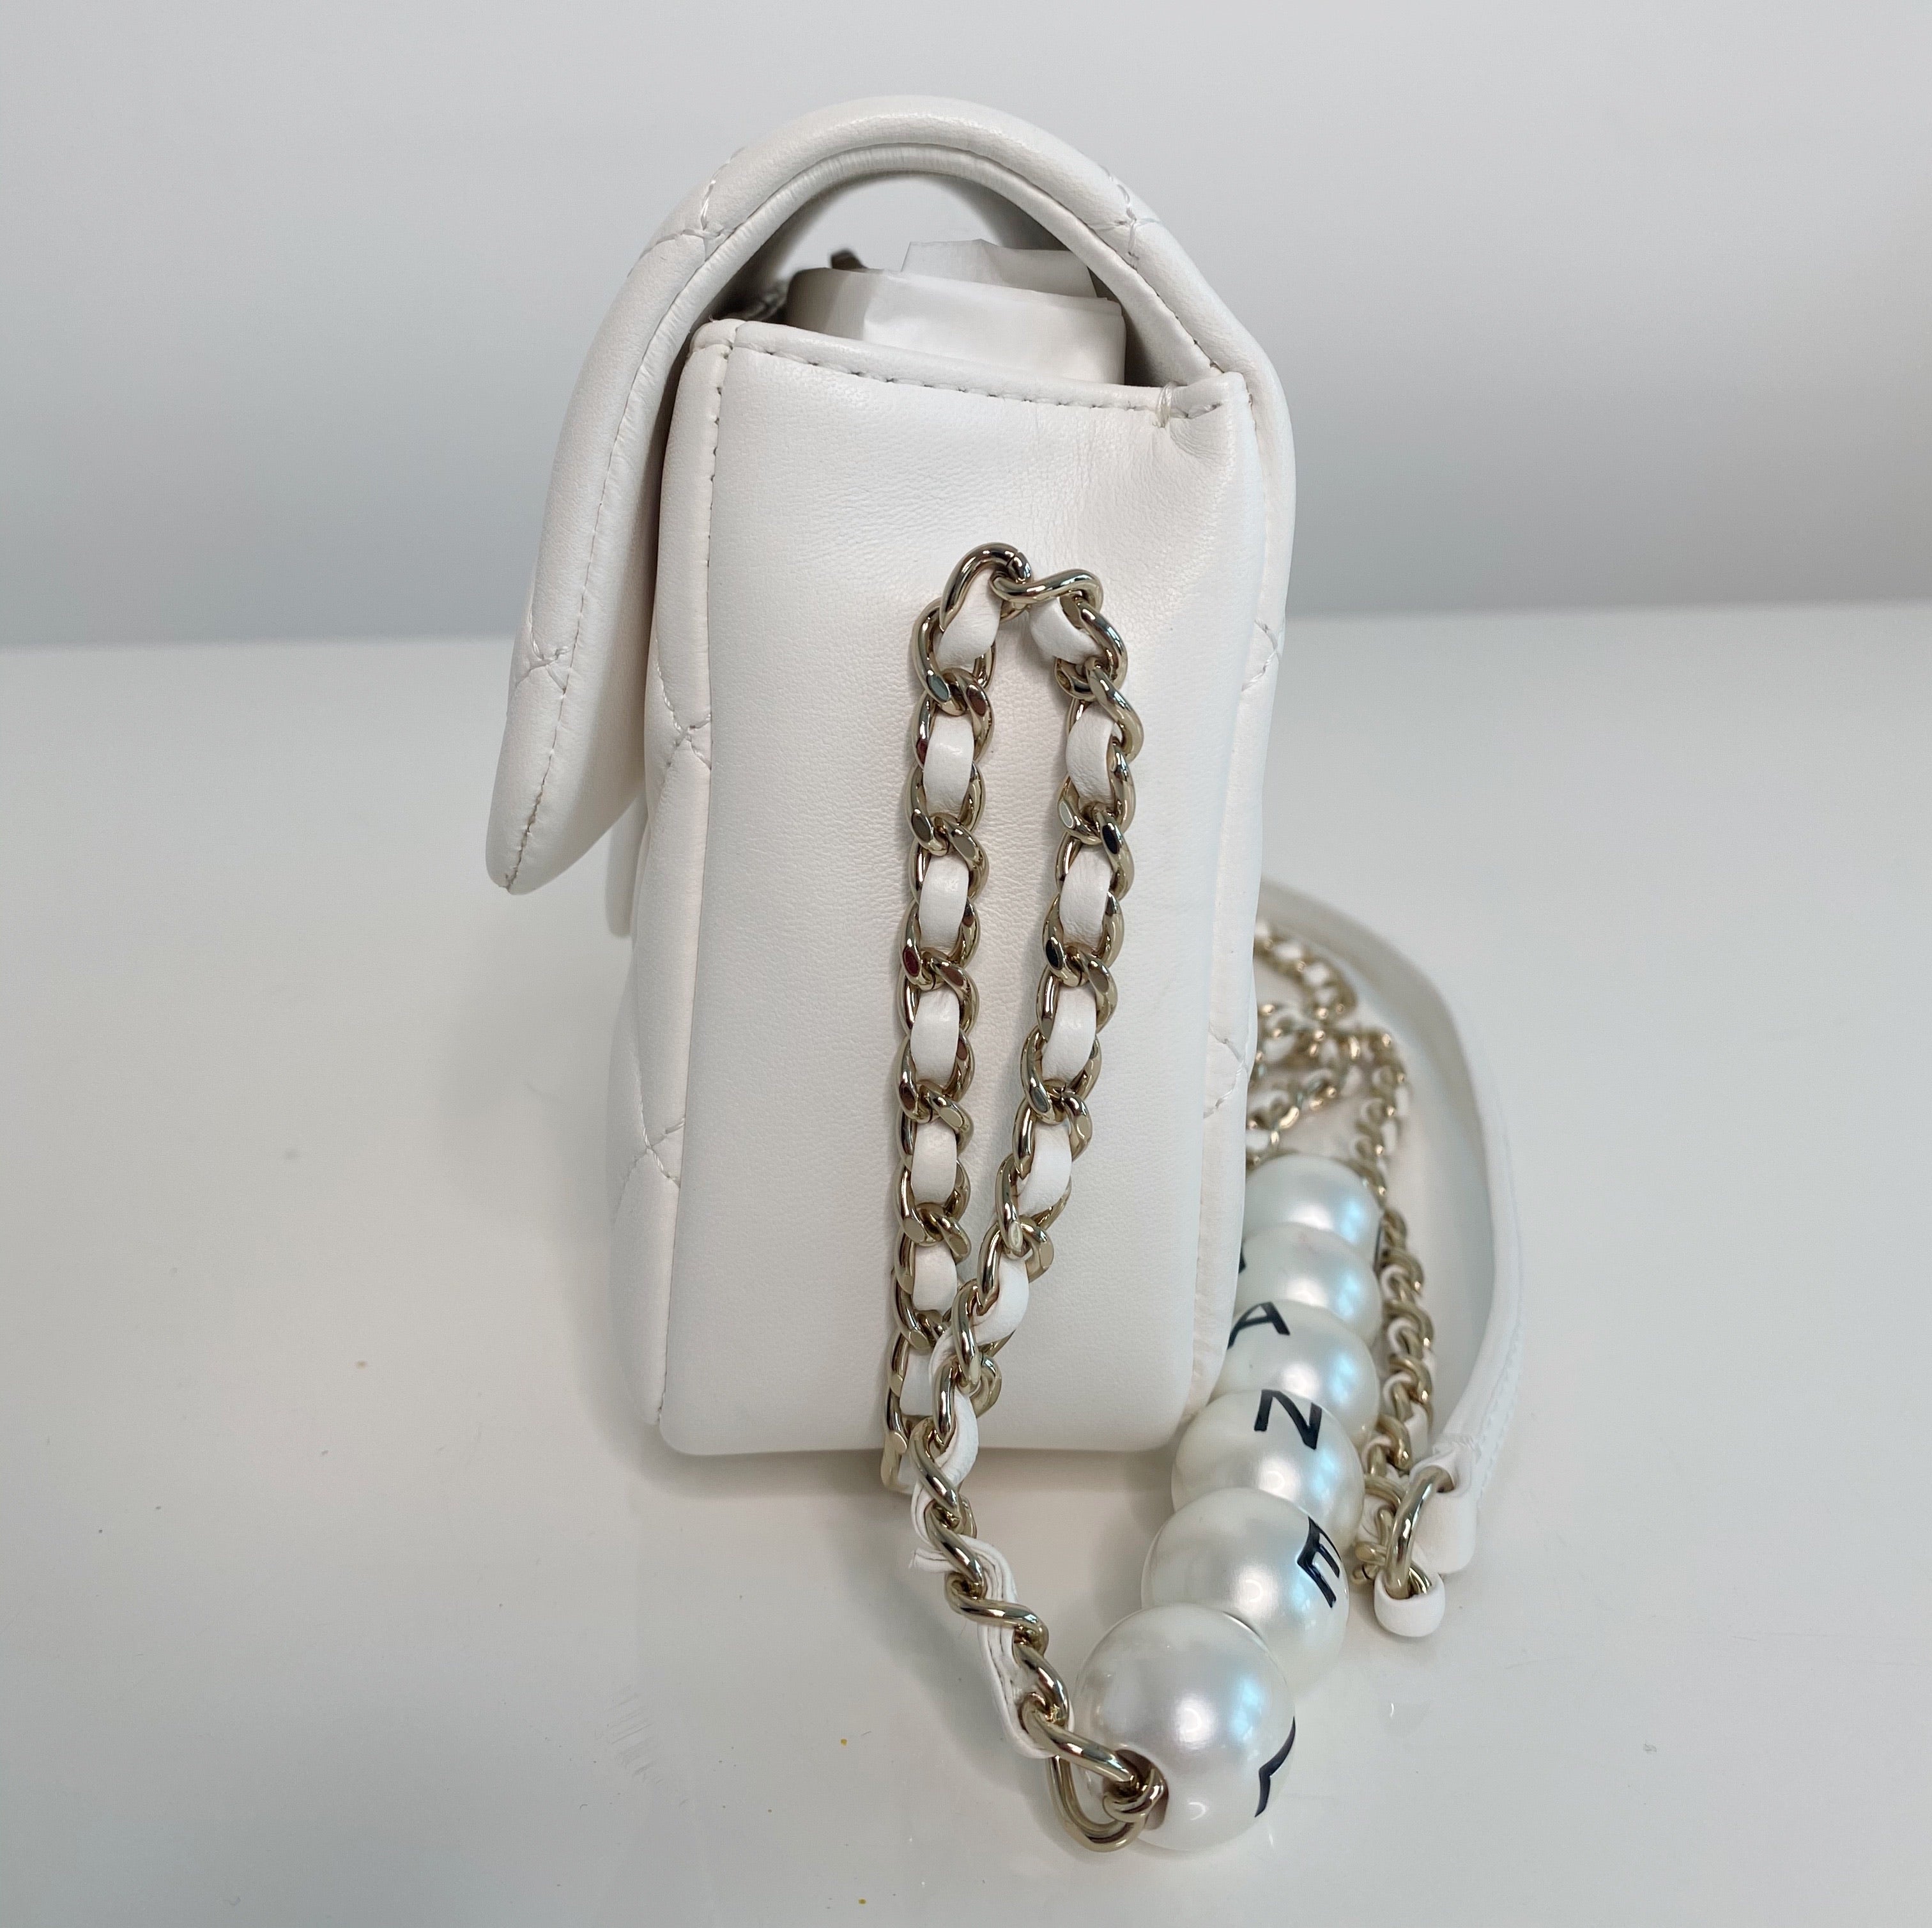 chanel white bag with pearls